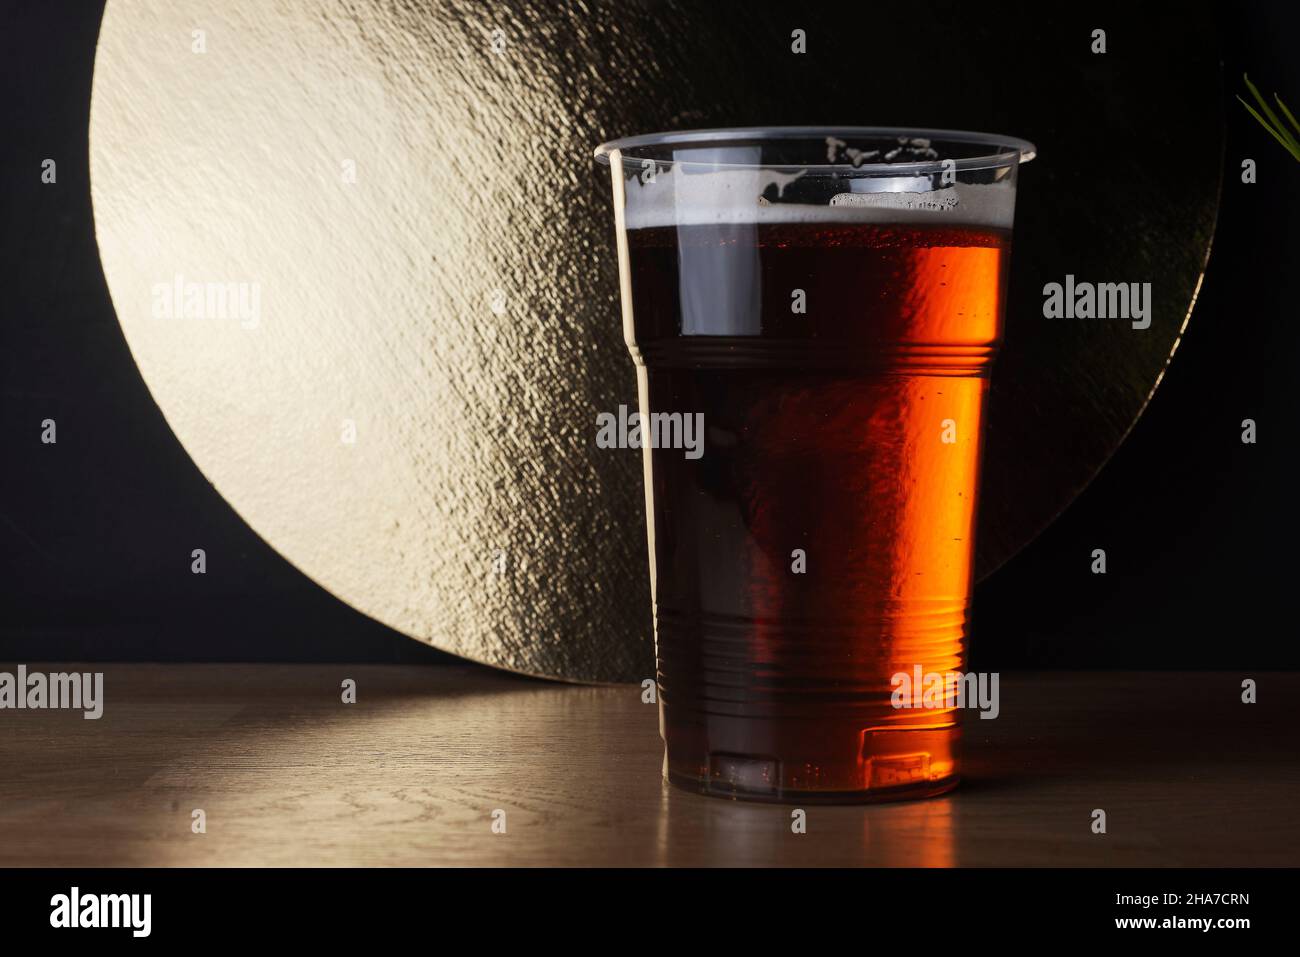 Plastic glass of IPA or APA craft beer or redale or lager in bar decoration. Stock Photo